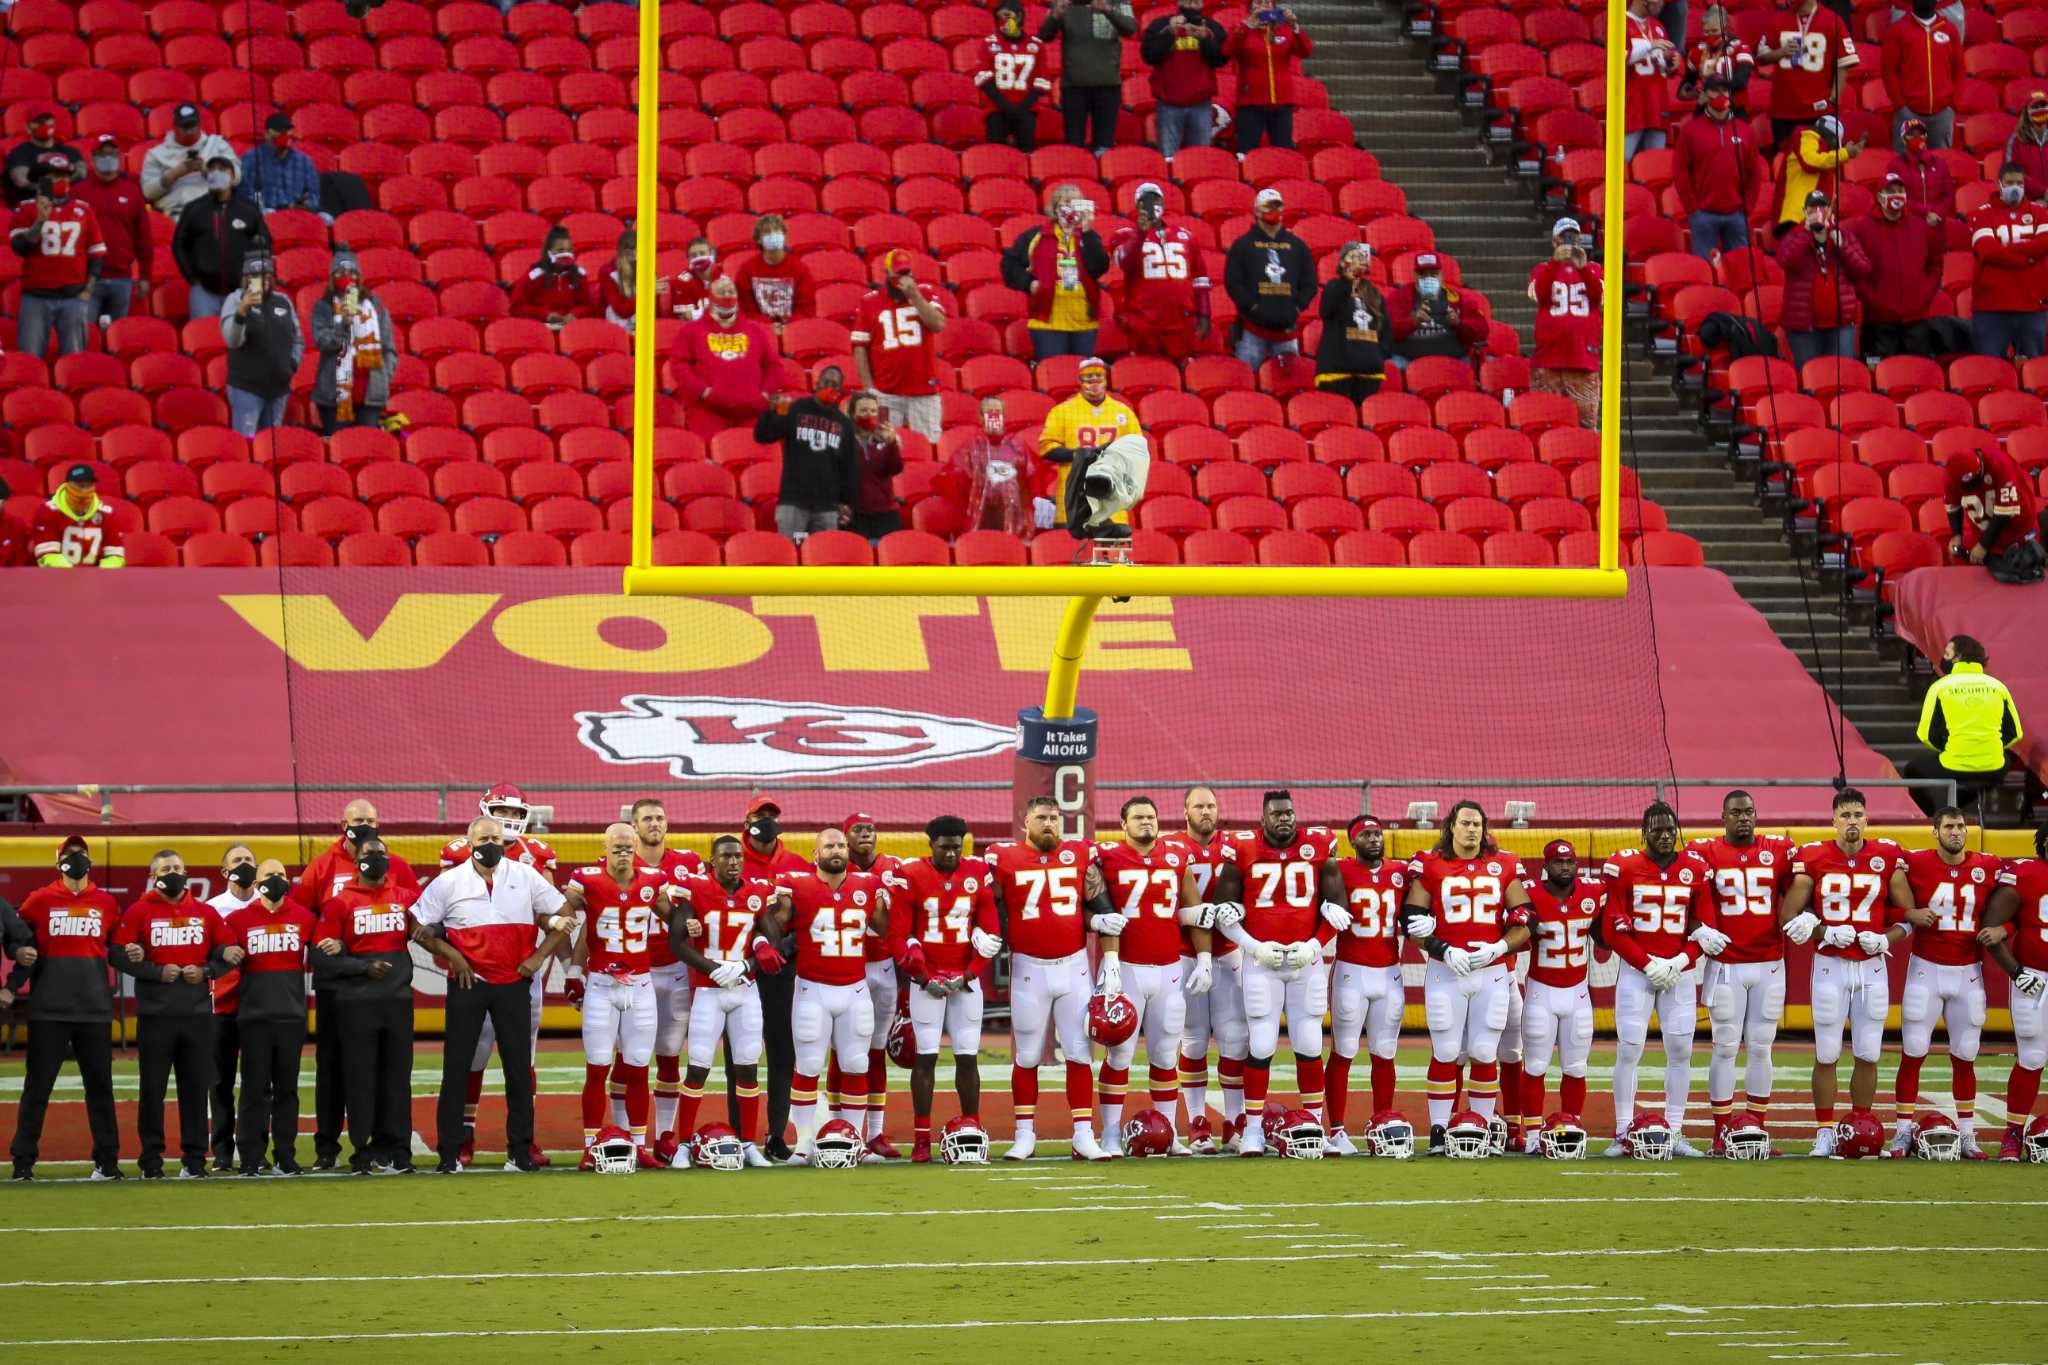 Kansas City Football Fans Booing During the Moment of Silence for